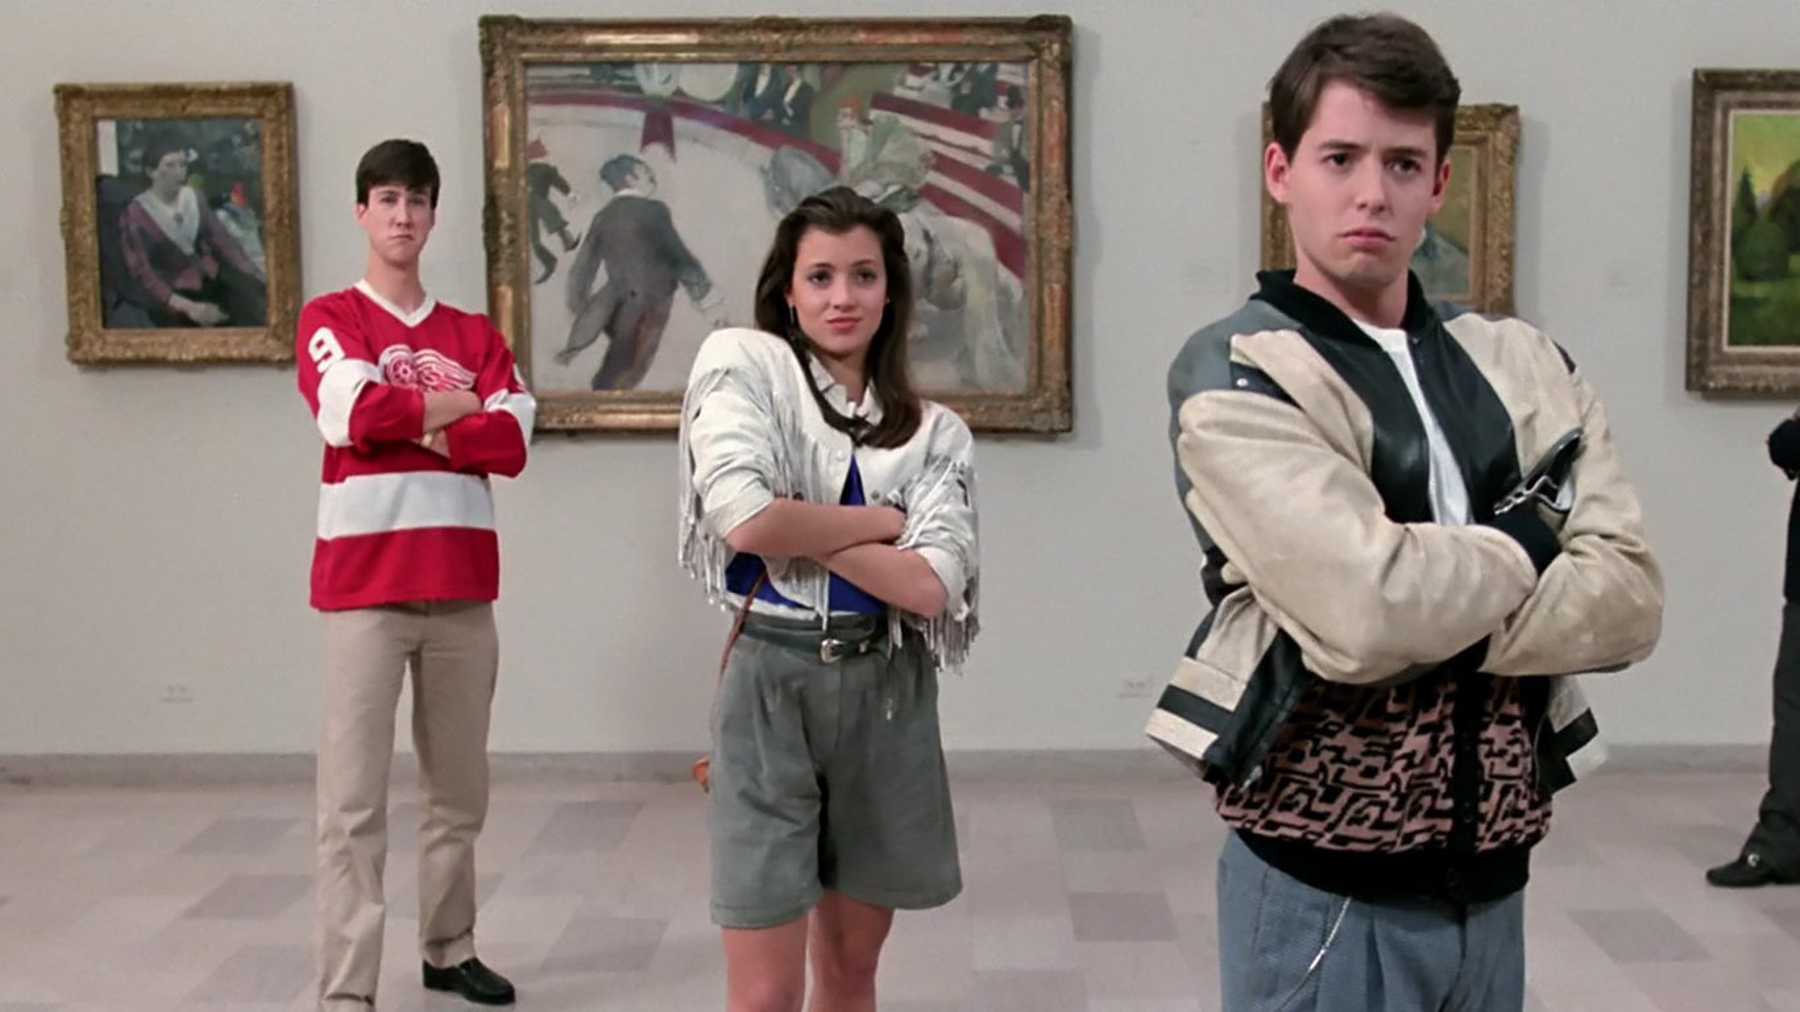 Reunited Apart – The Cast Of Ferris Bueller To Appear For Final Episode